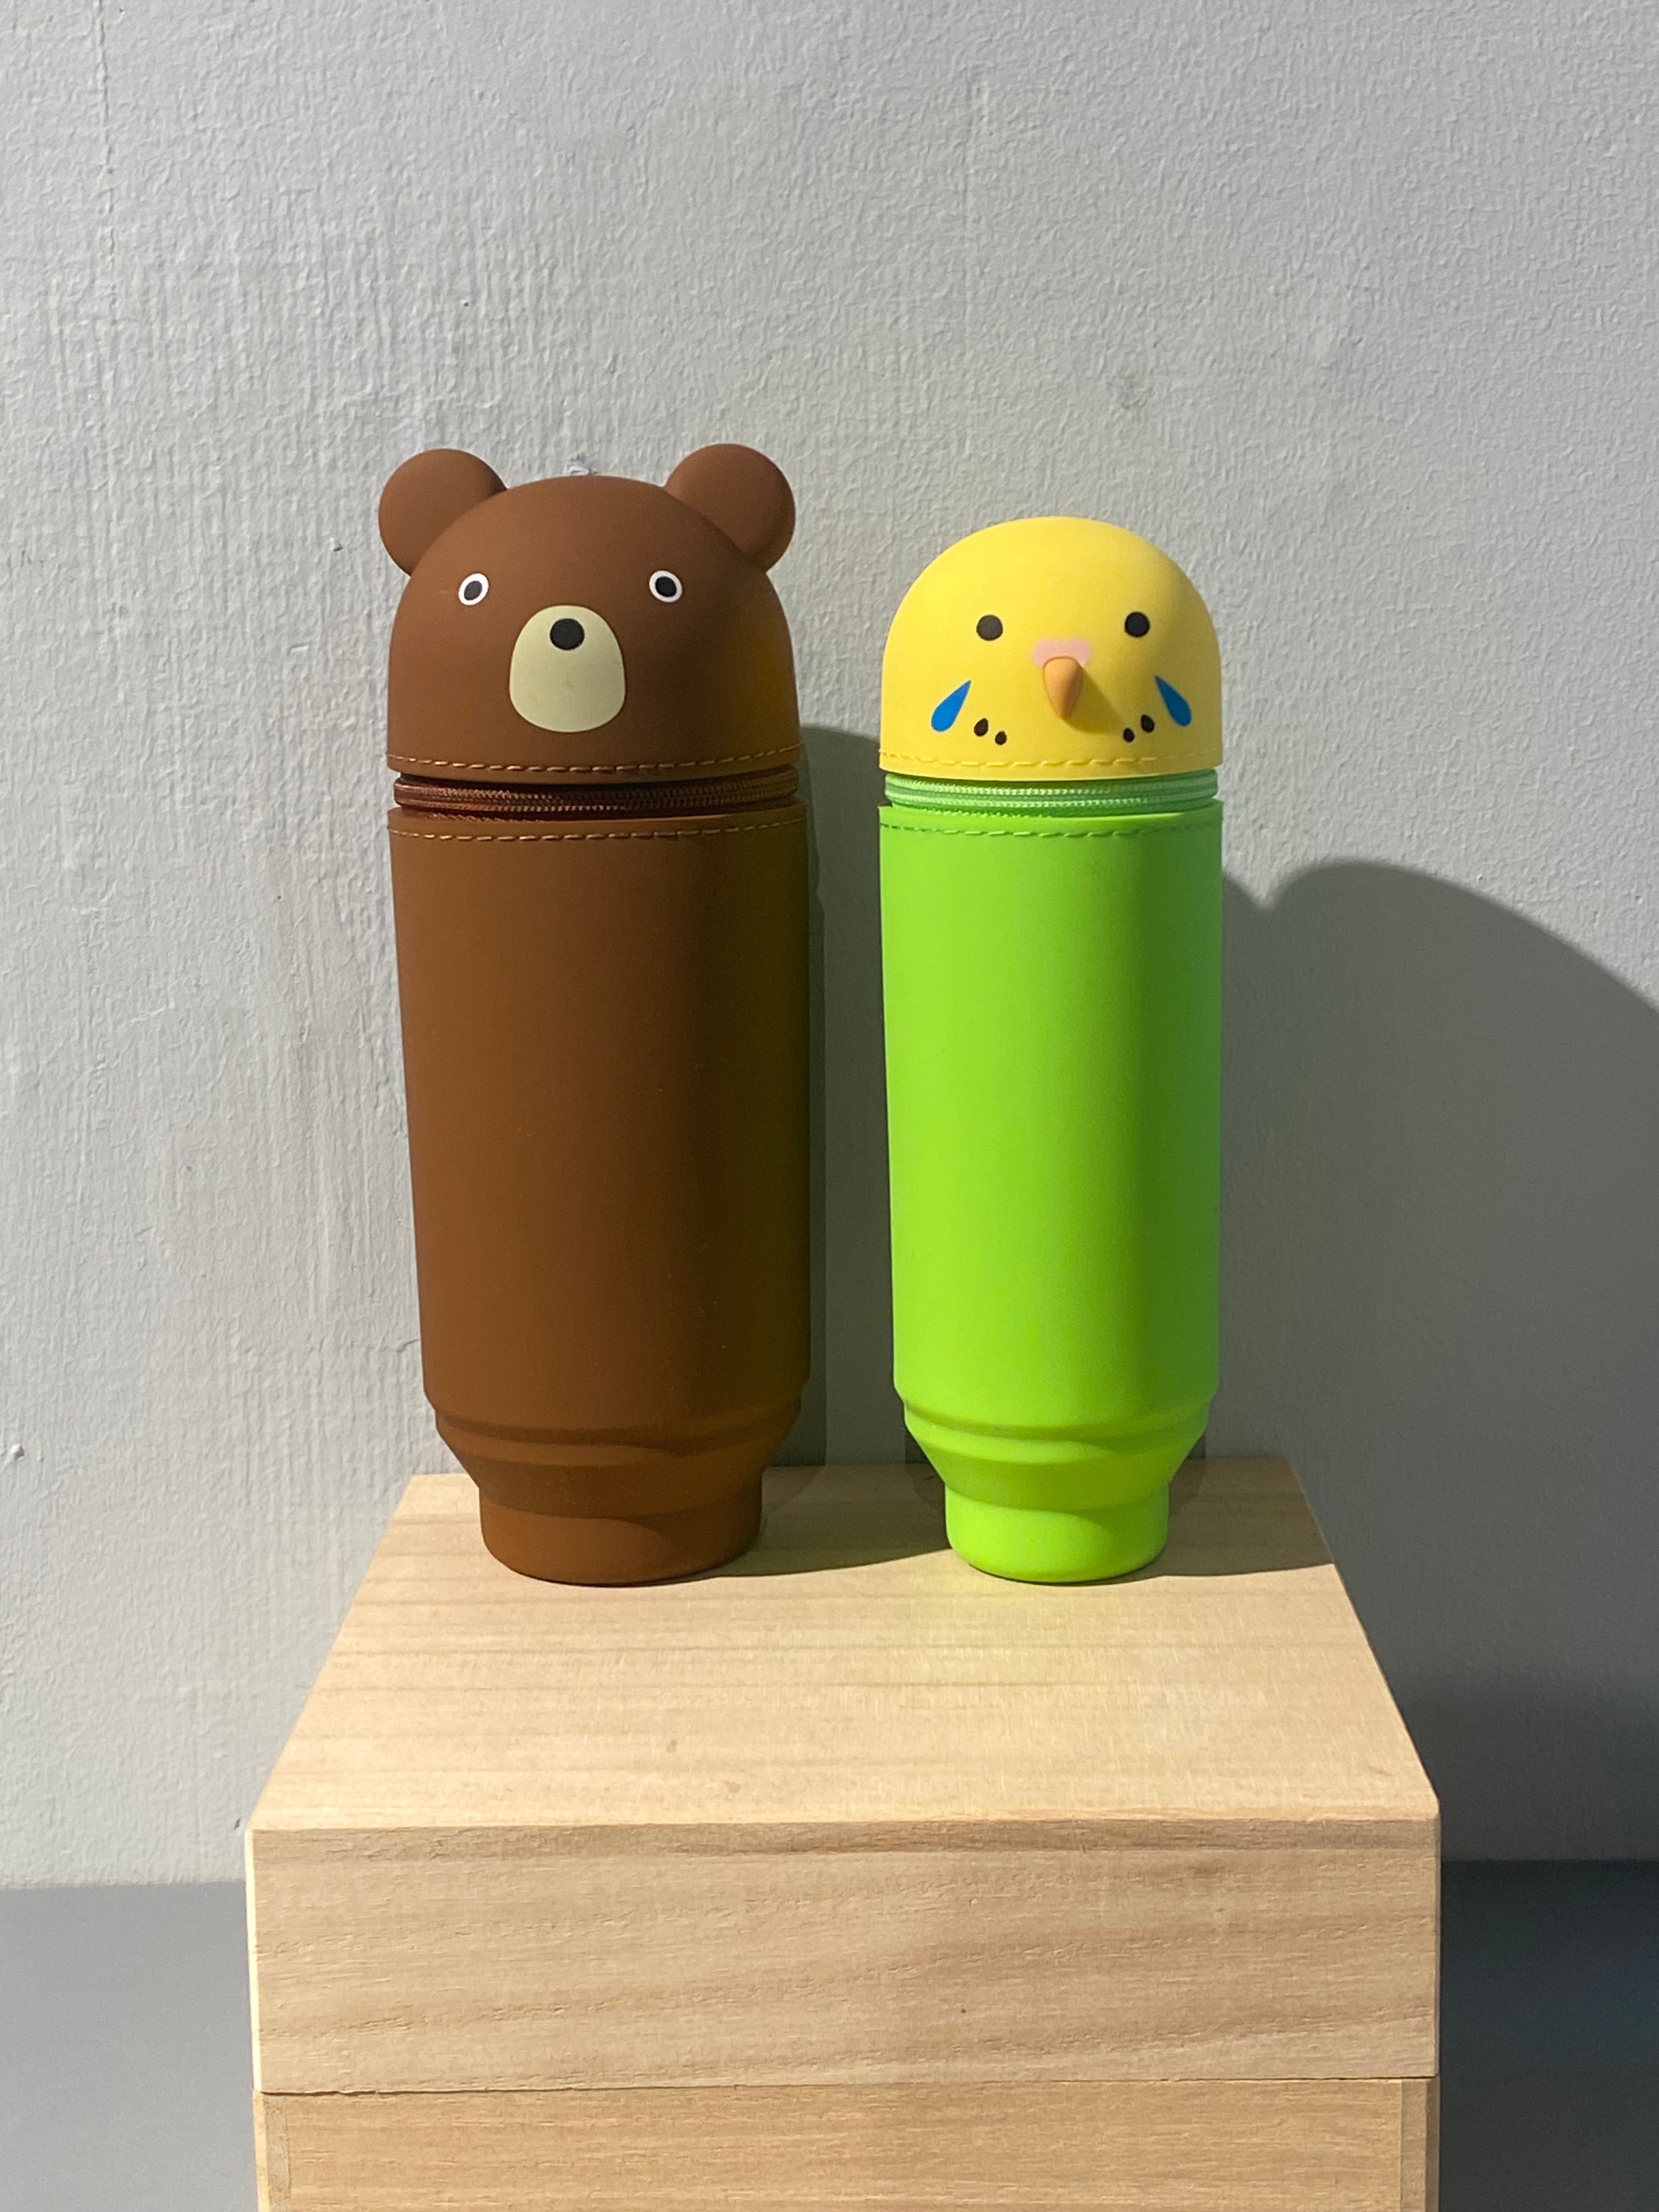 Pen houses with different animals